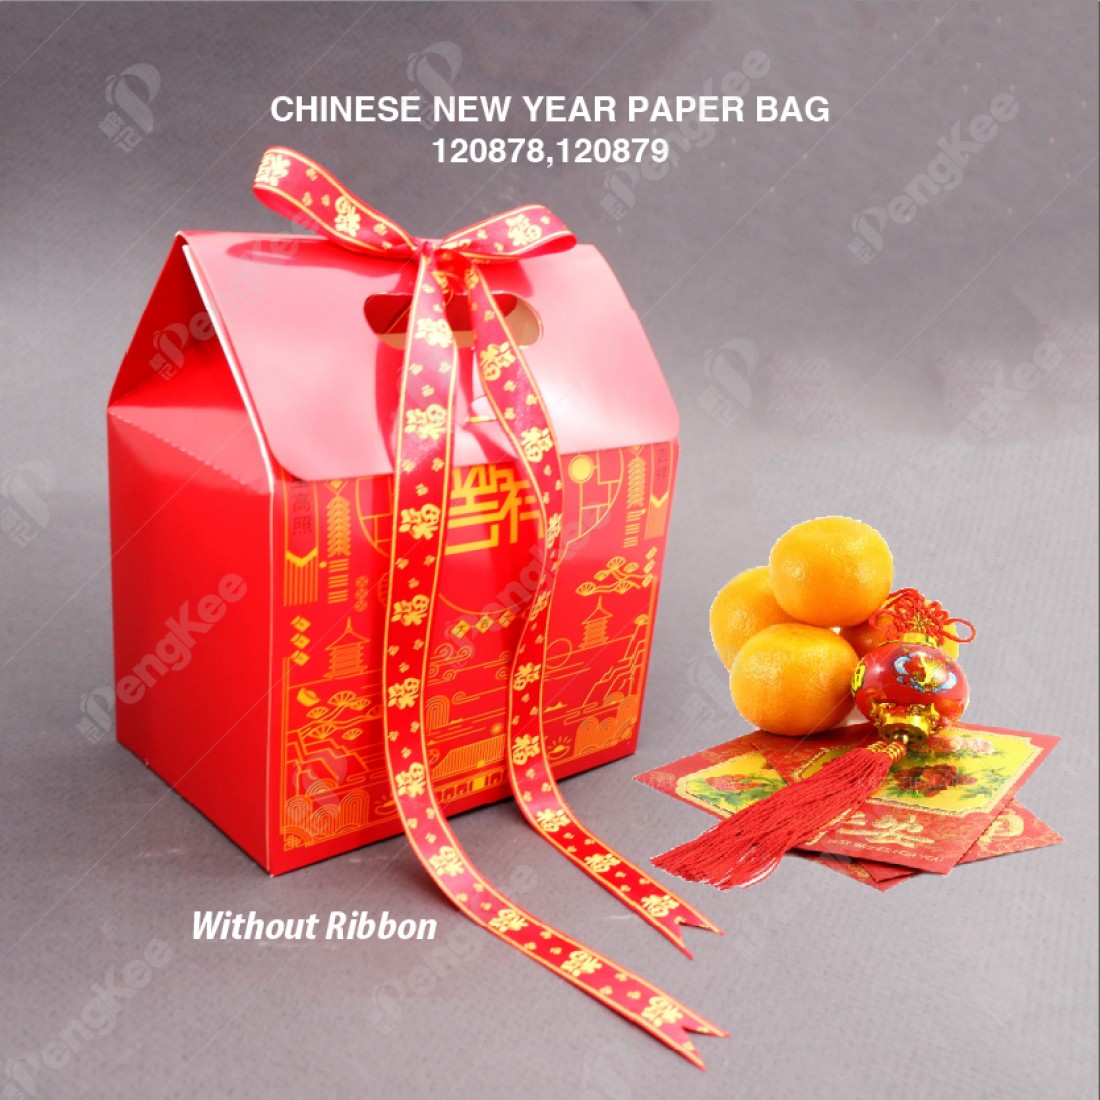 PAPER BAG FOR CHINESE NEW YEAR GIFT BOX  5'S/PKT